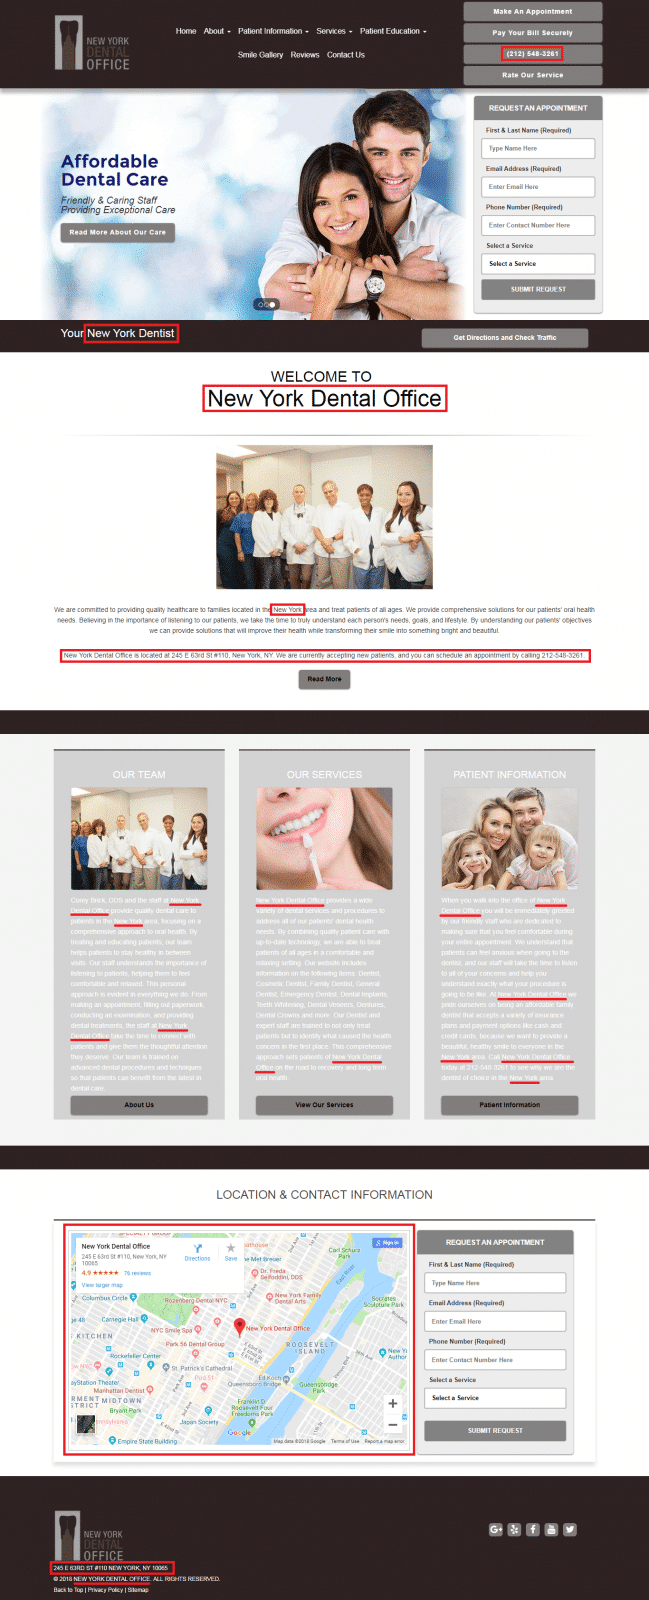 New York Dental Office’s On page SEO